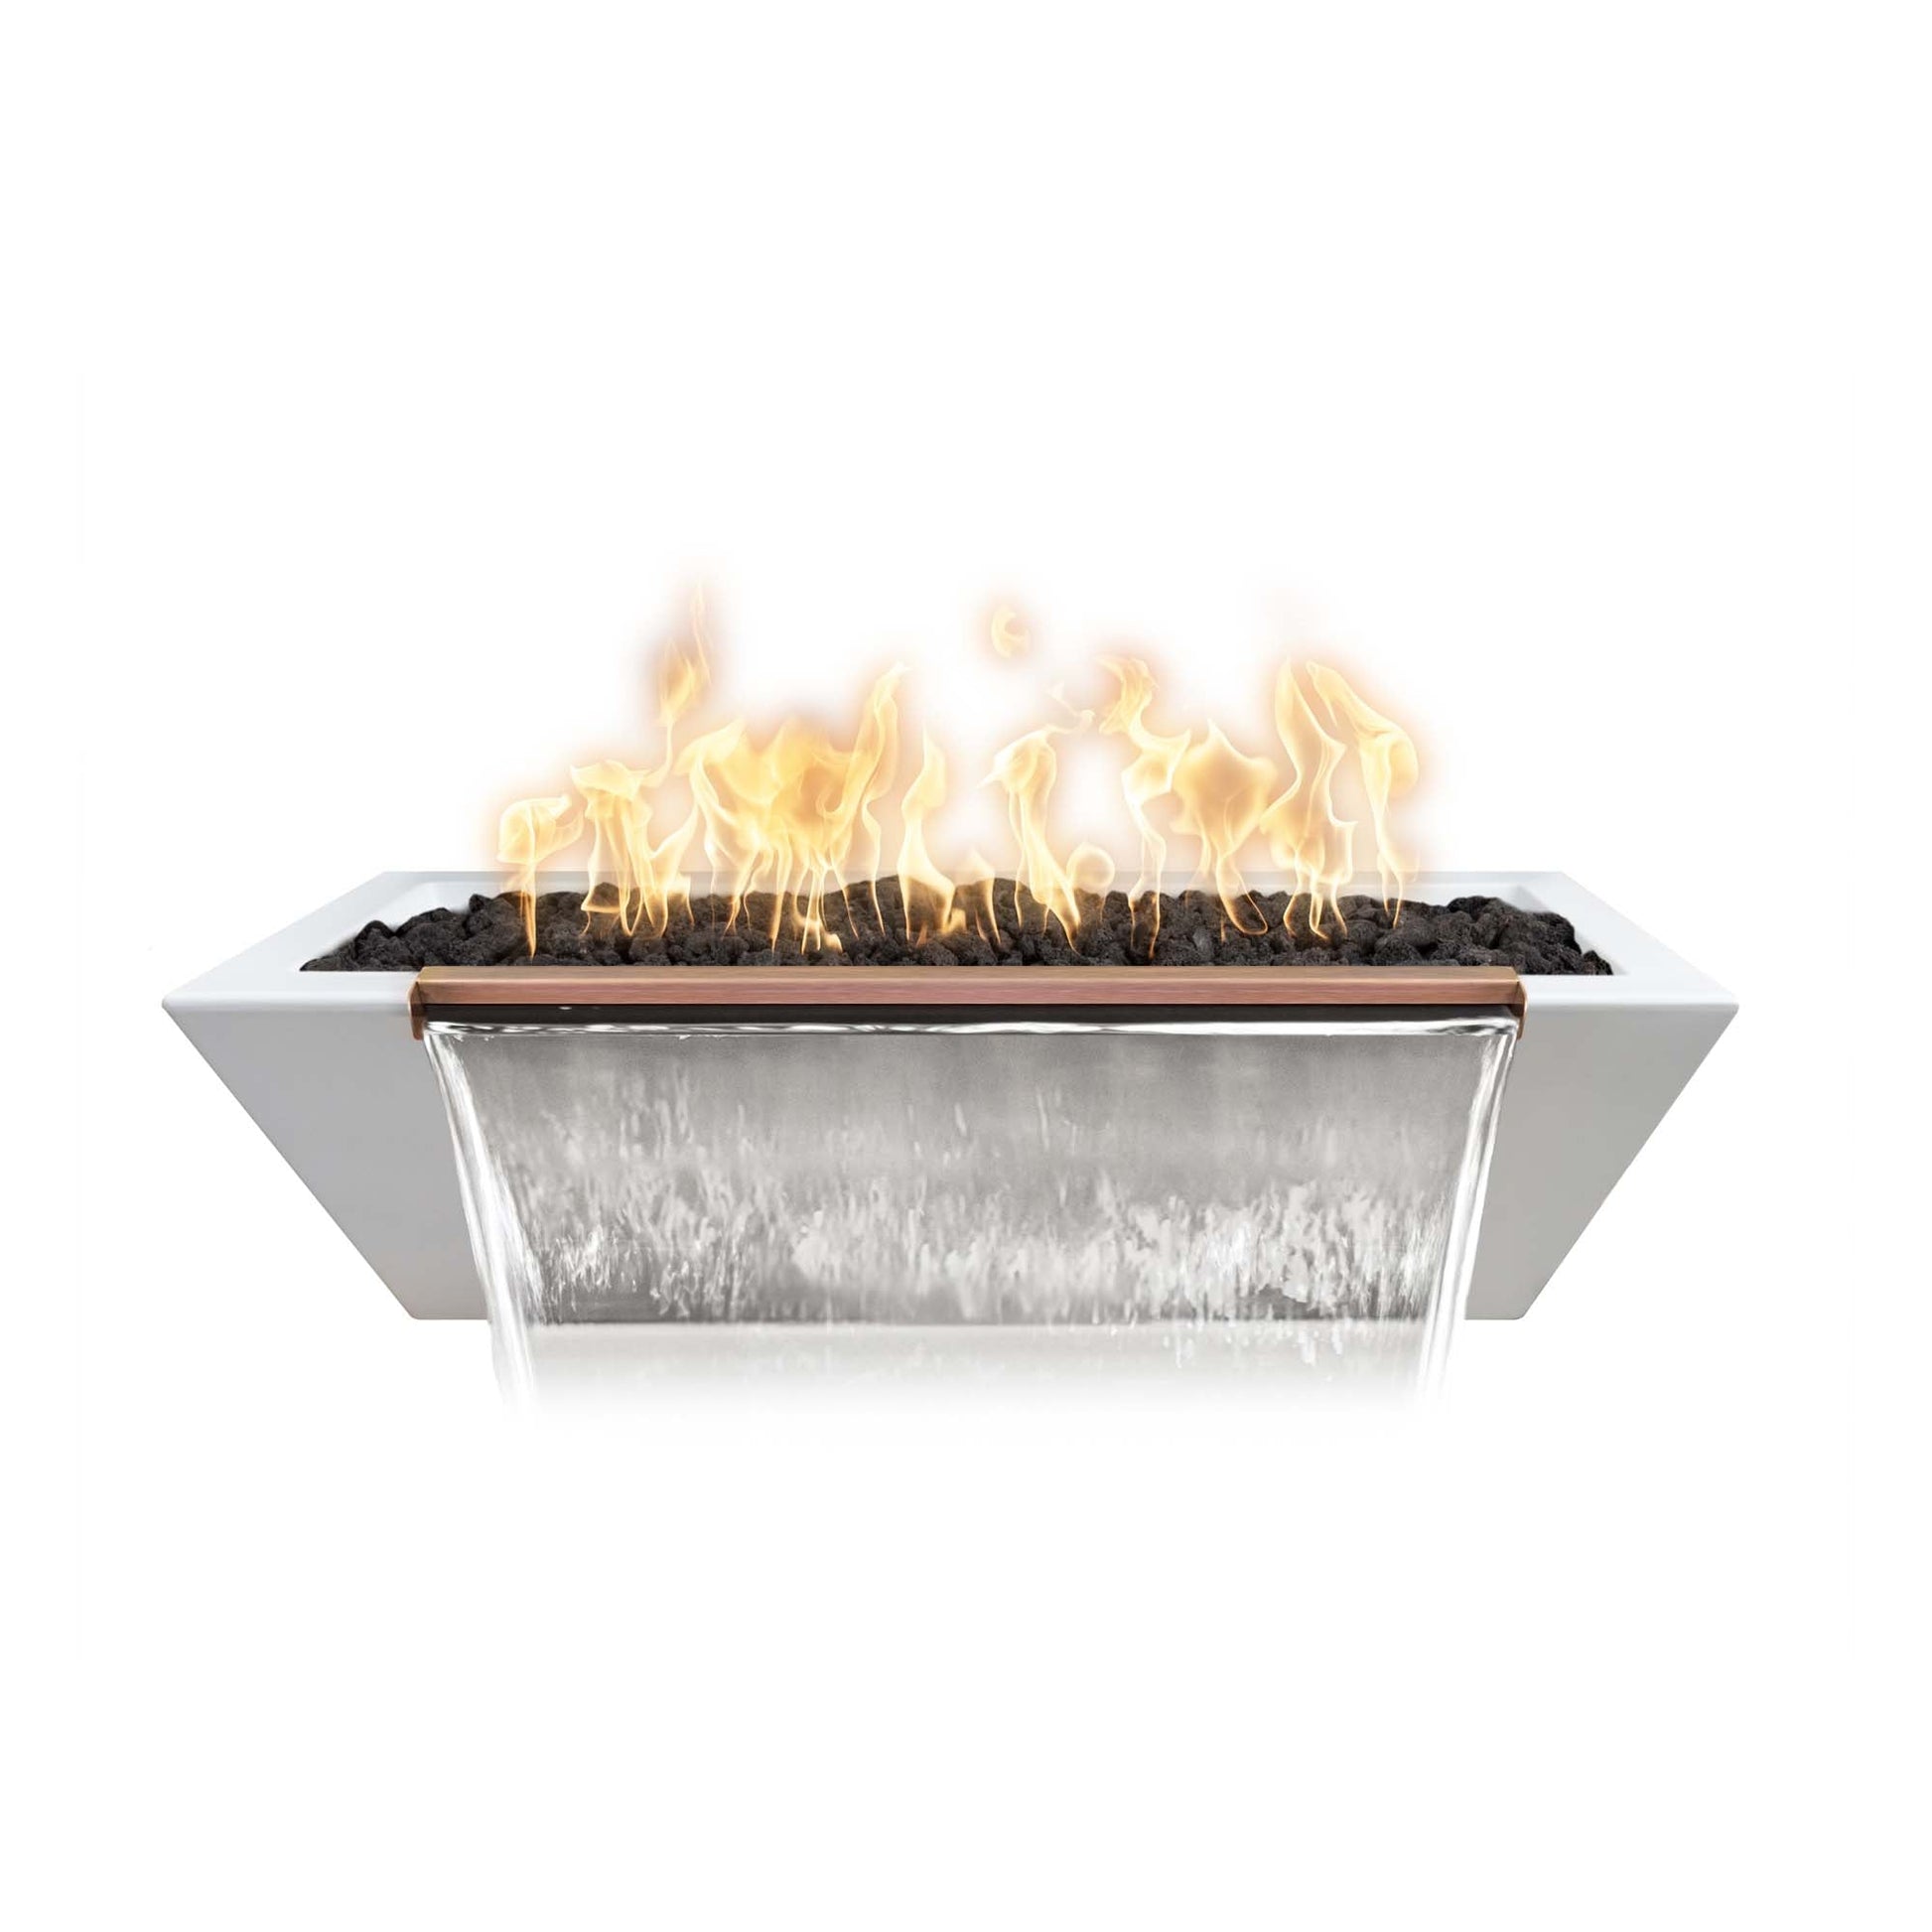 The Outdoor Plus Linear Maya 72" Rustic Coffee GFRC Concrete Liquid Propane Fire & Water Bowl with 12V Electronic Ignition